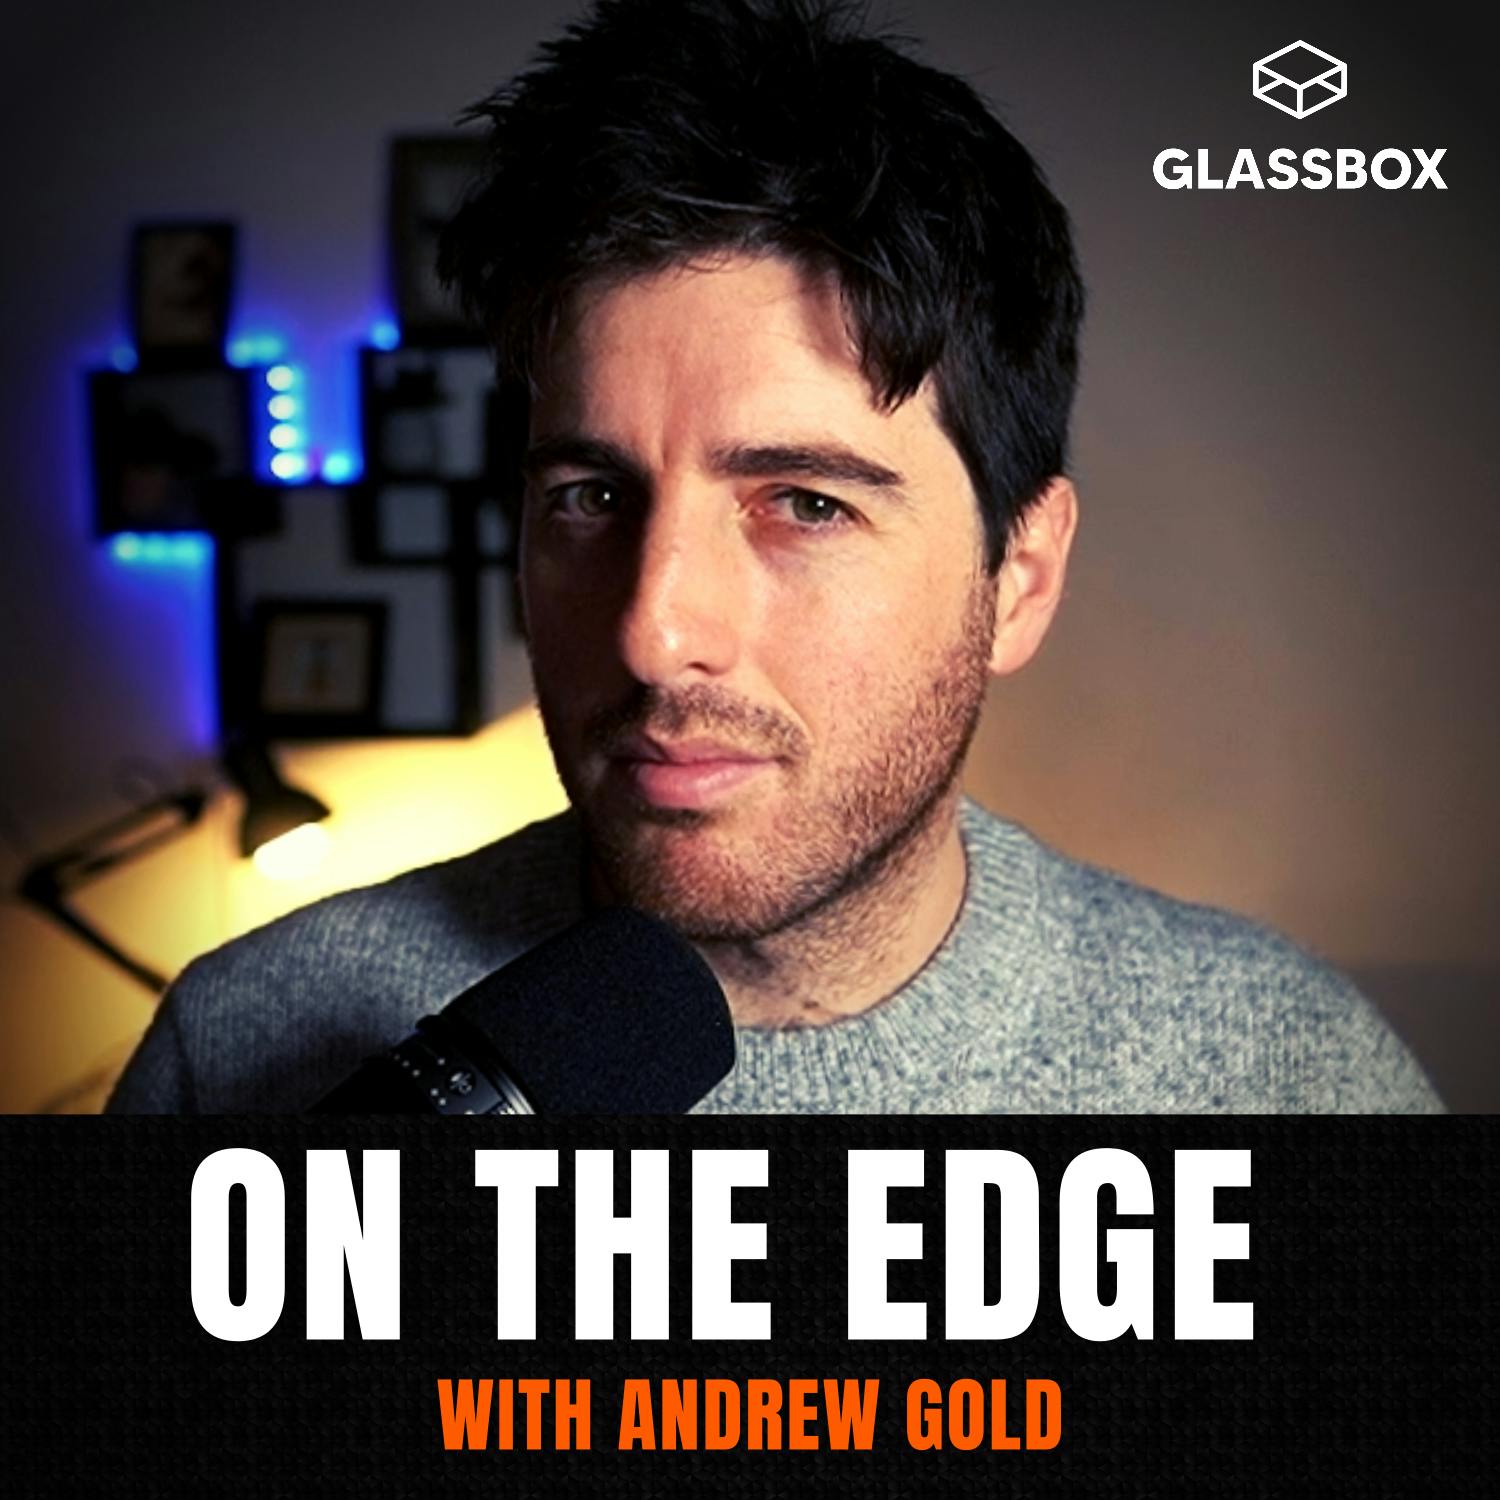 On the Edge with Andrew Gold:Andrew Gold & Glassbox Media